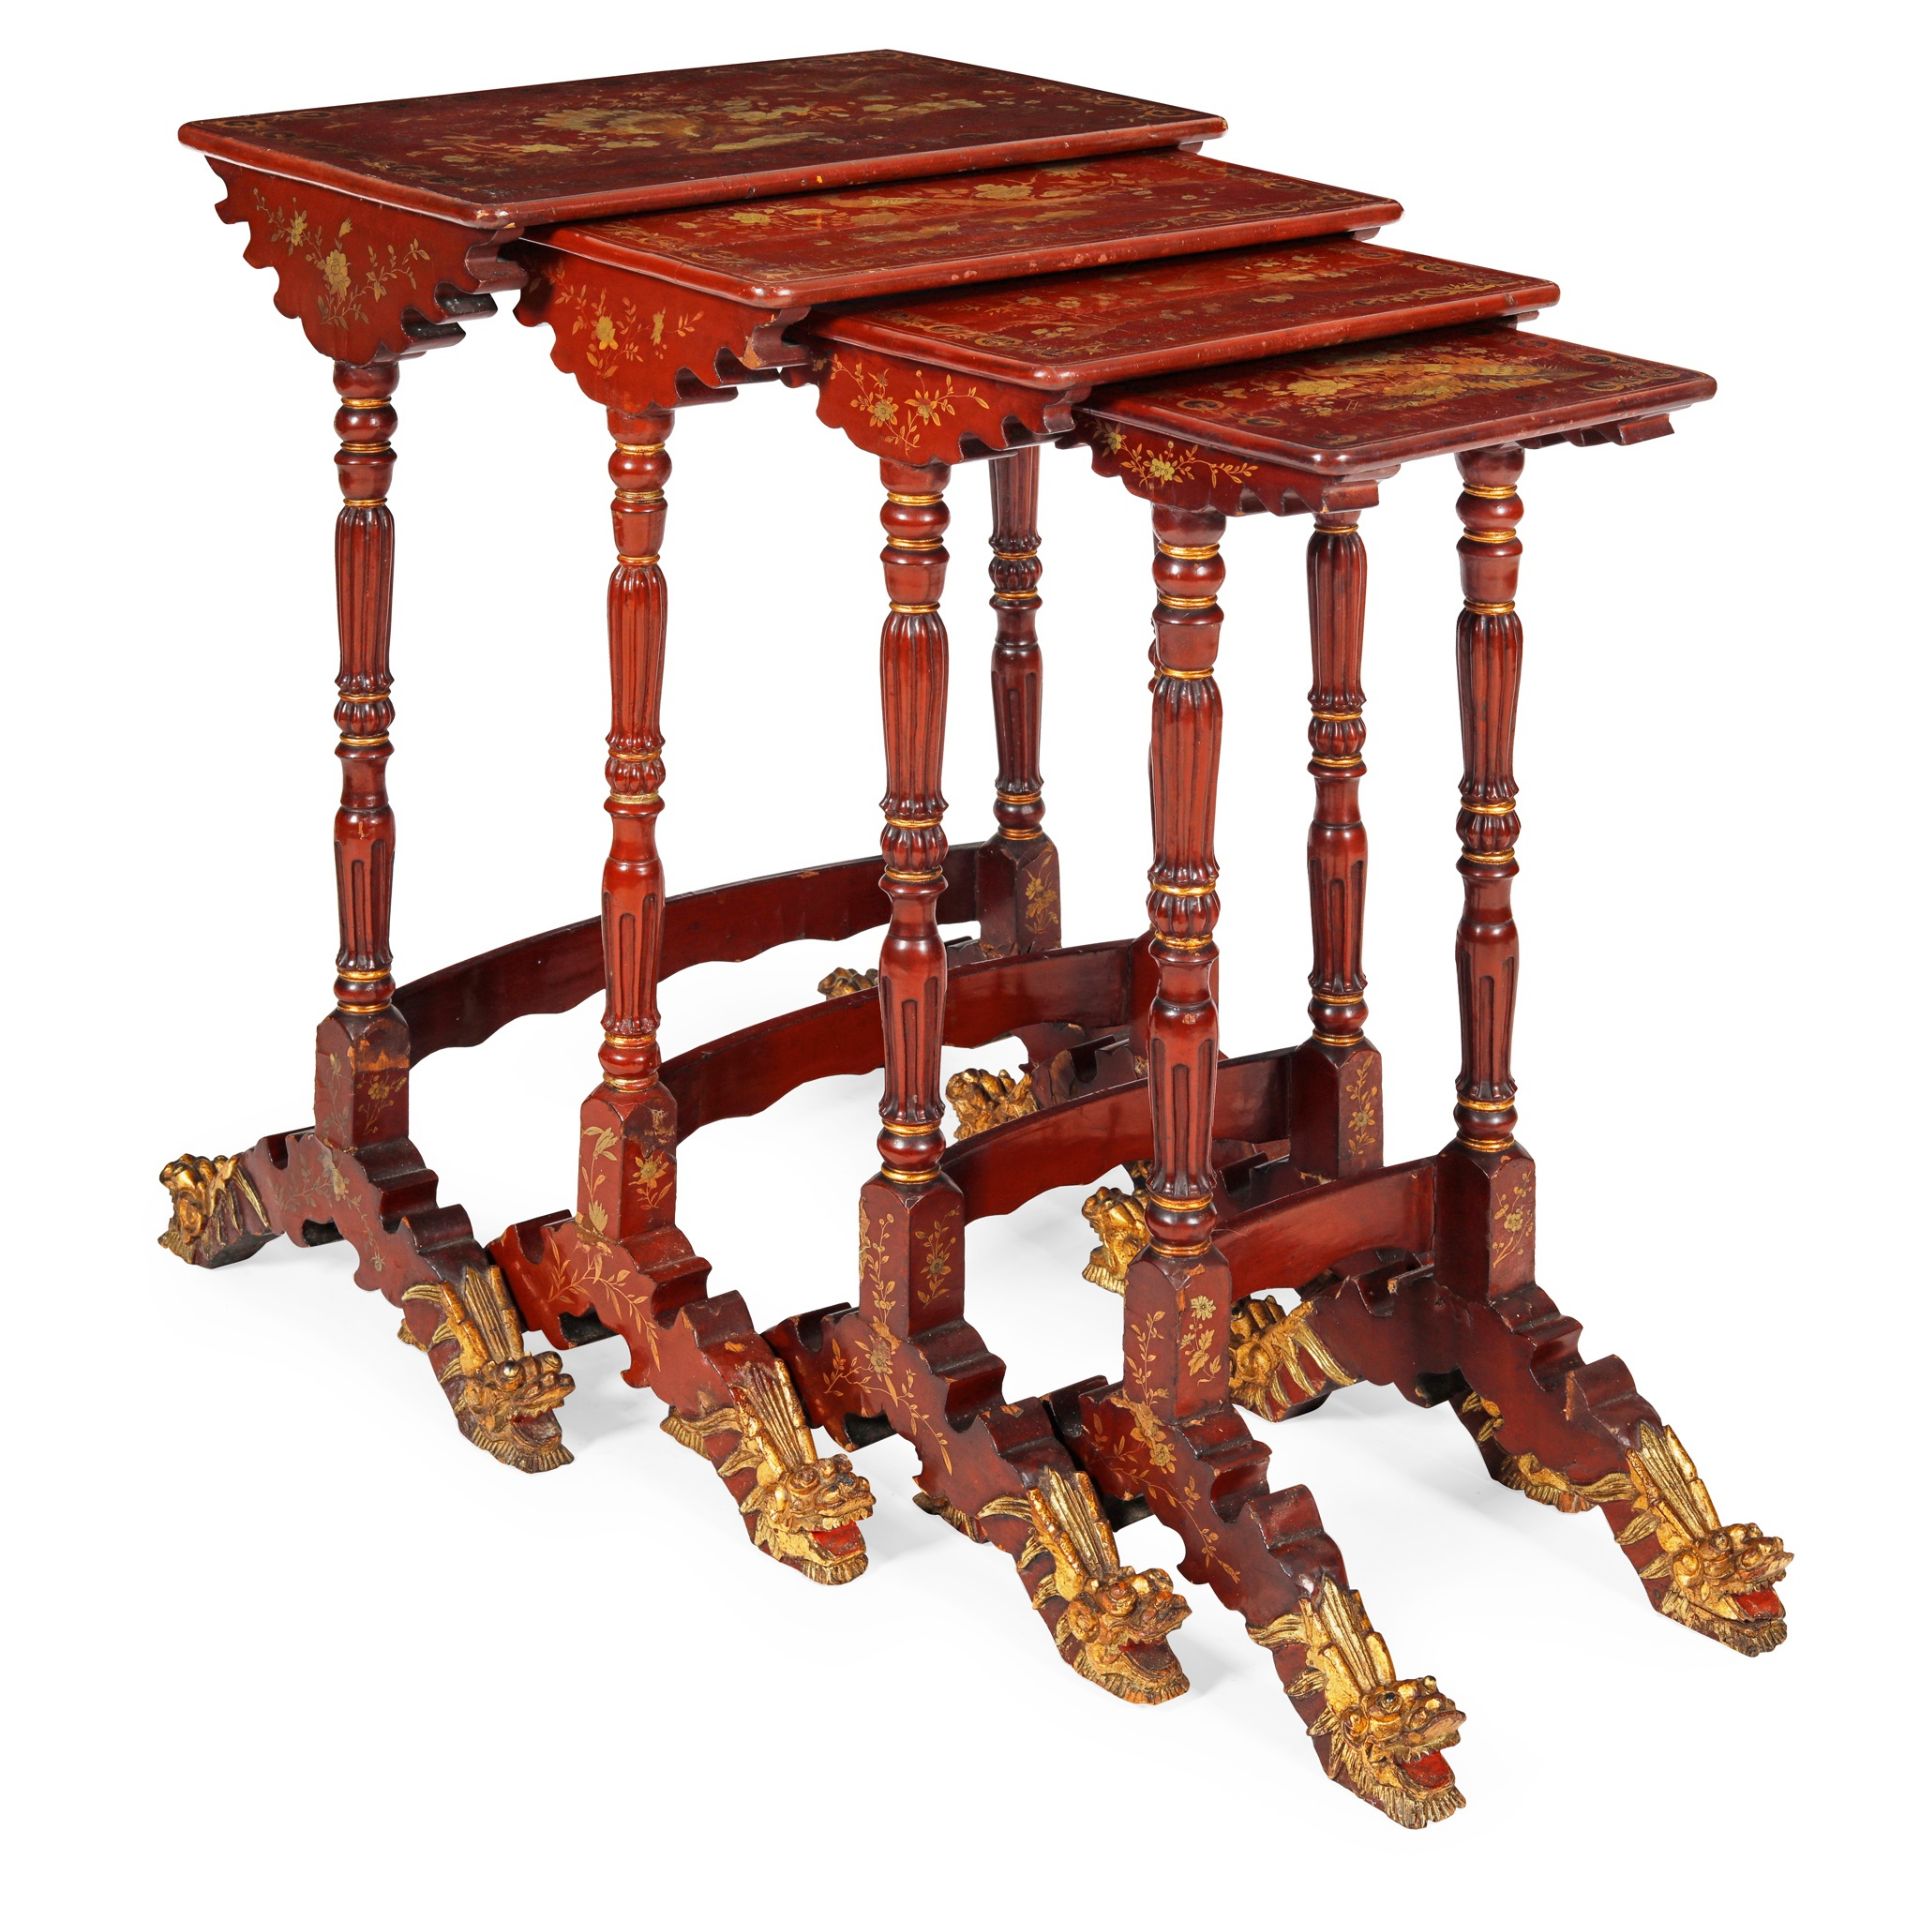 NEST OF CHINESE EXPORT RED PAINTED AND GILT WOOD QUARTETTO TABLES 19TH CENTURY